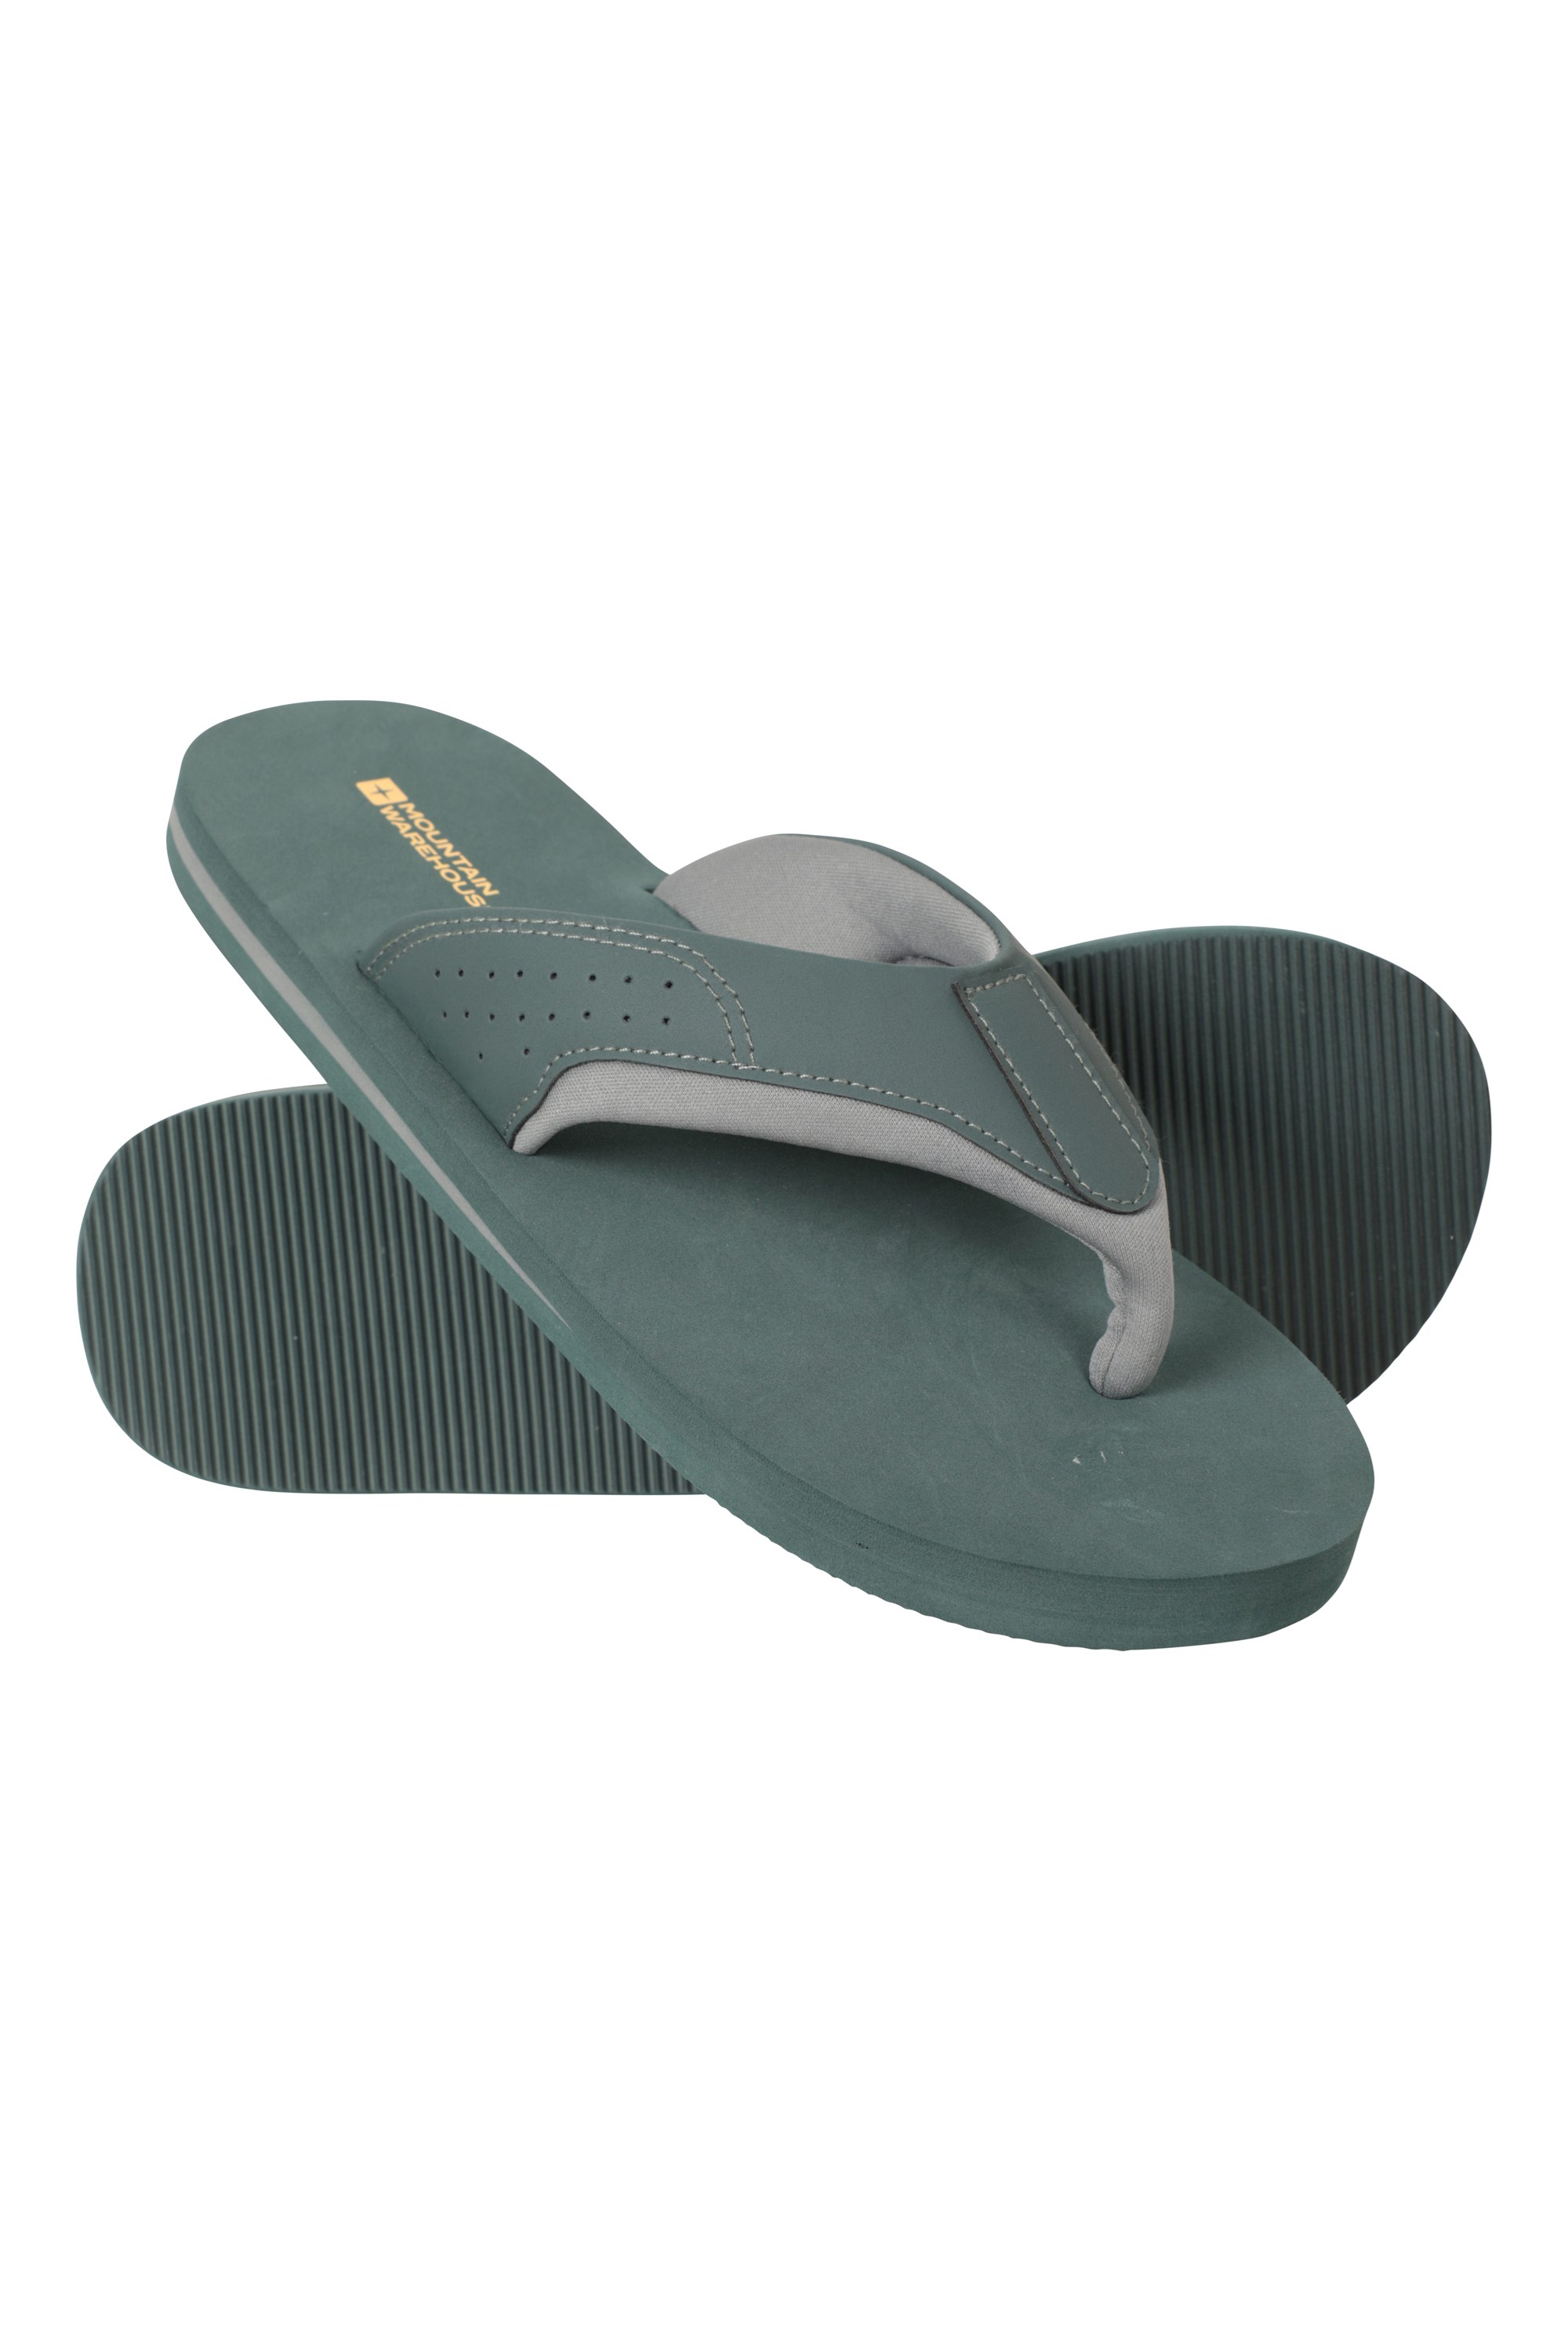 Vacation Recycled Flip Flops - Green